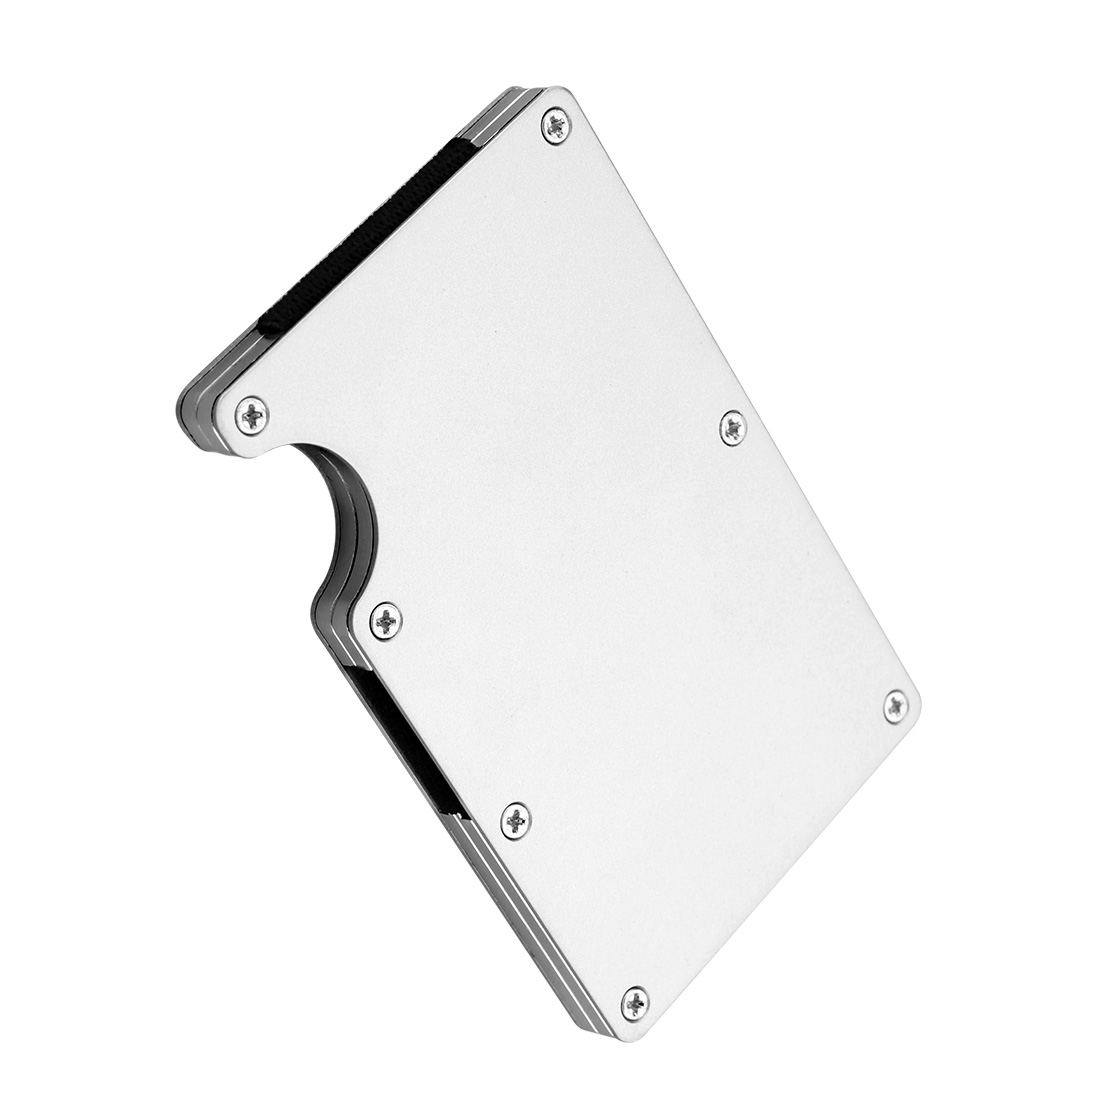 Slim Compact Aluminum Alloy Wallet Money Clip ID Credit Card Holder - Silver